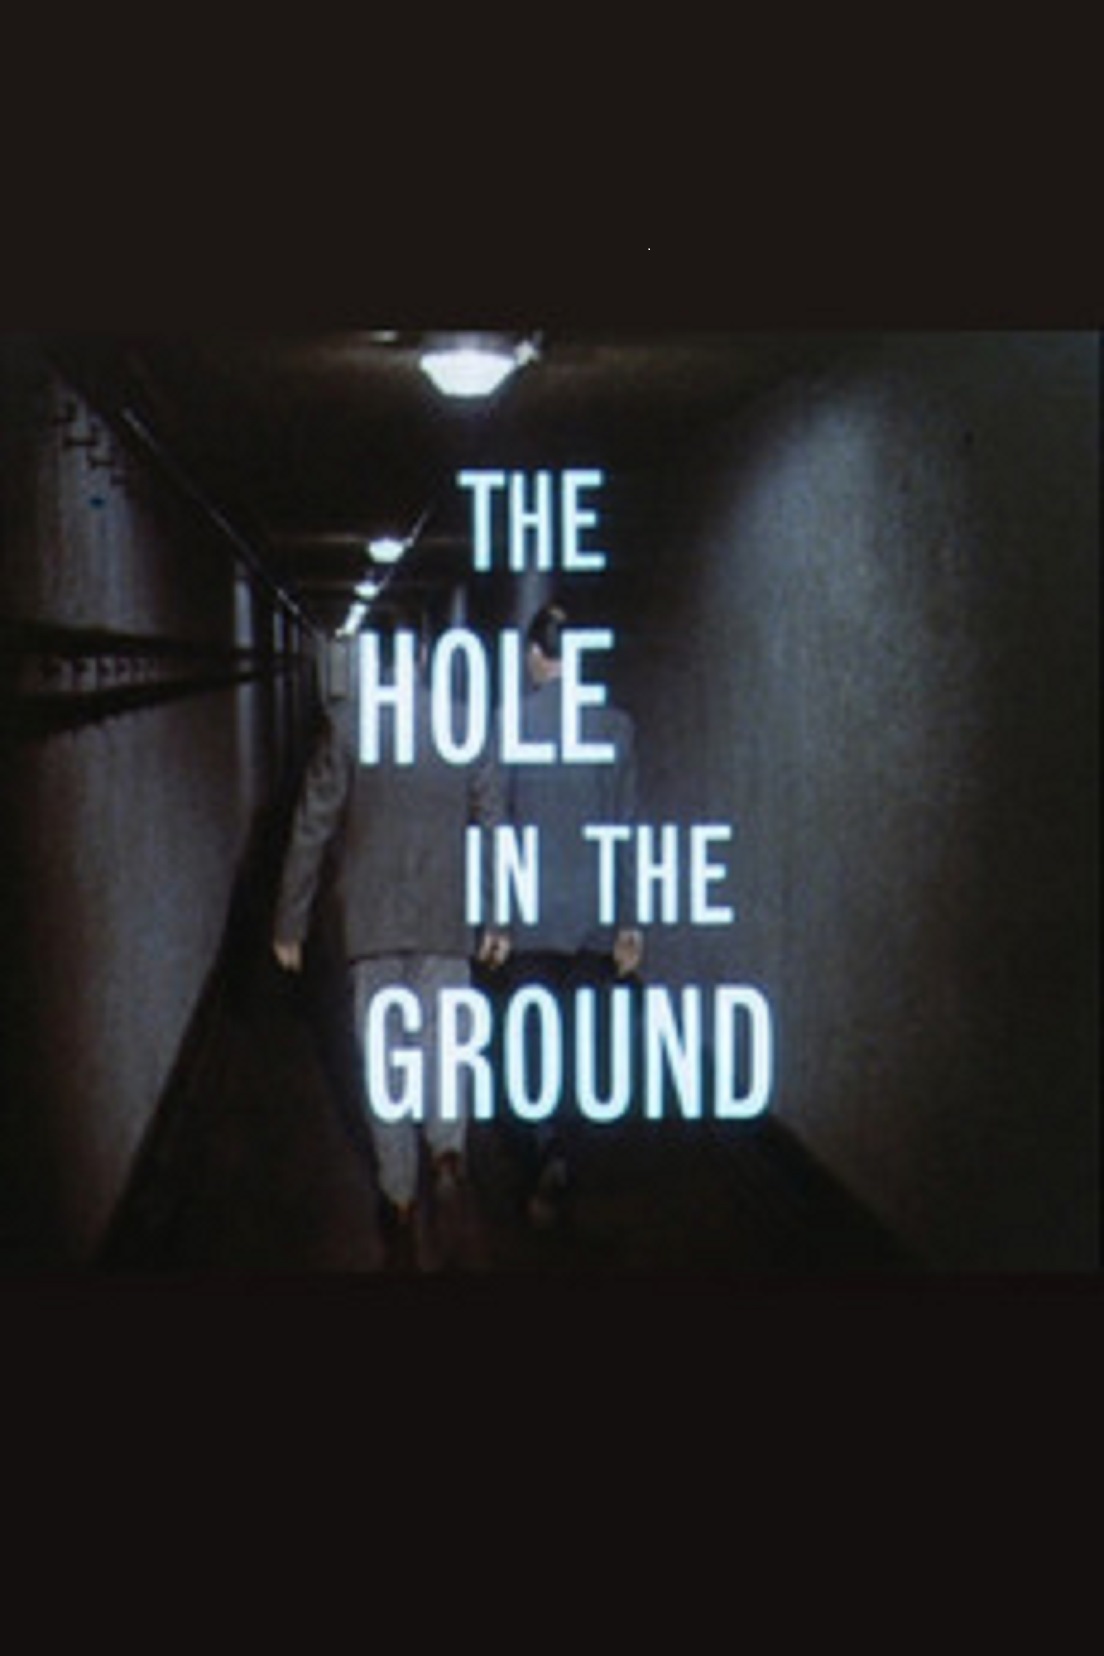 The Hole in the Ground (1962) Screenshot 1 